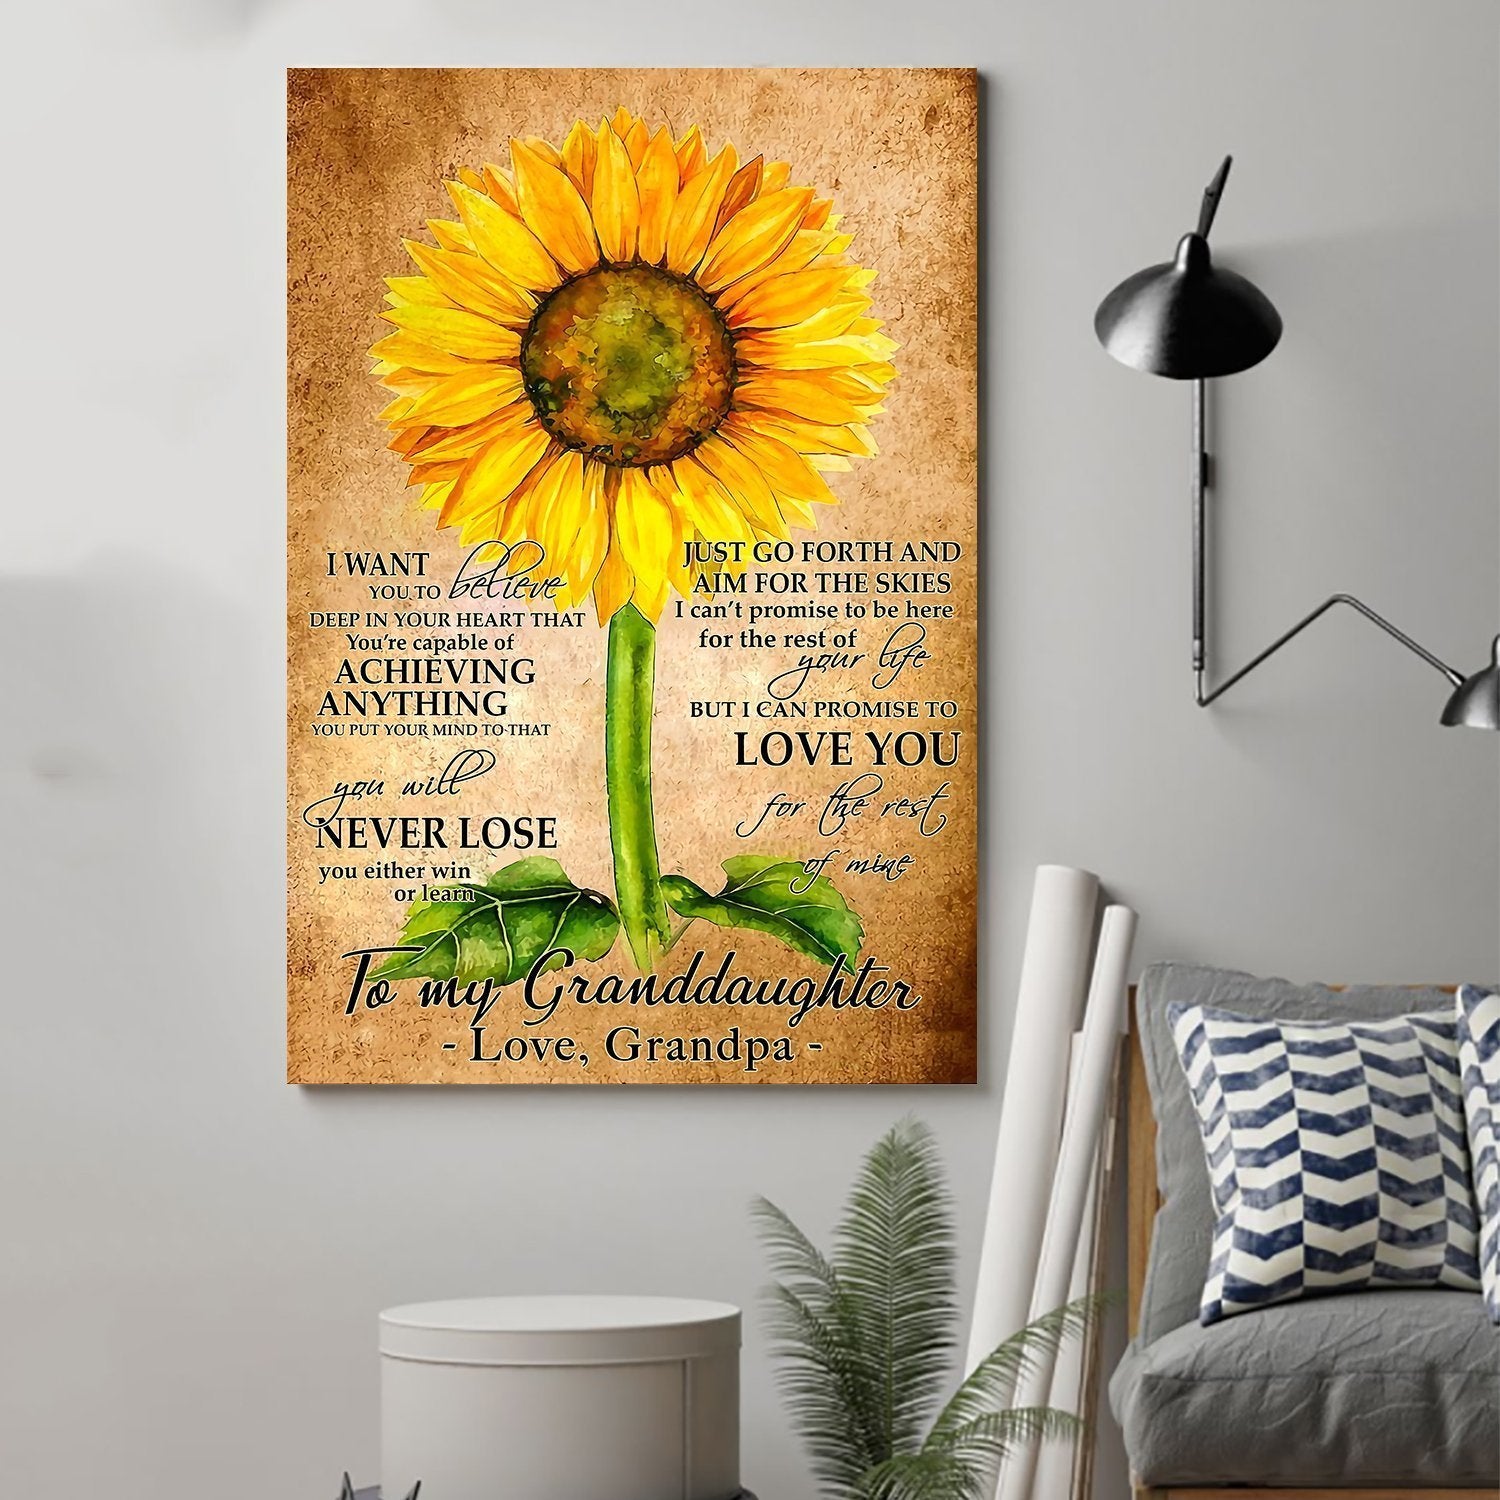 Sunflower Canvas and Poster ��� grandpa to granddaughter ��� never lose wall decor visual art - GIFTCUSTOM